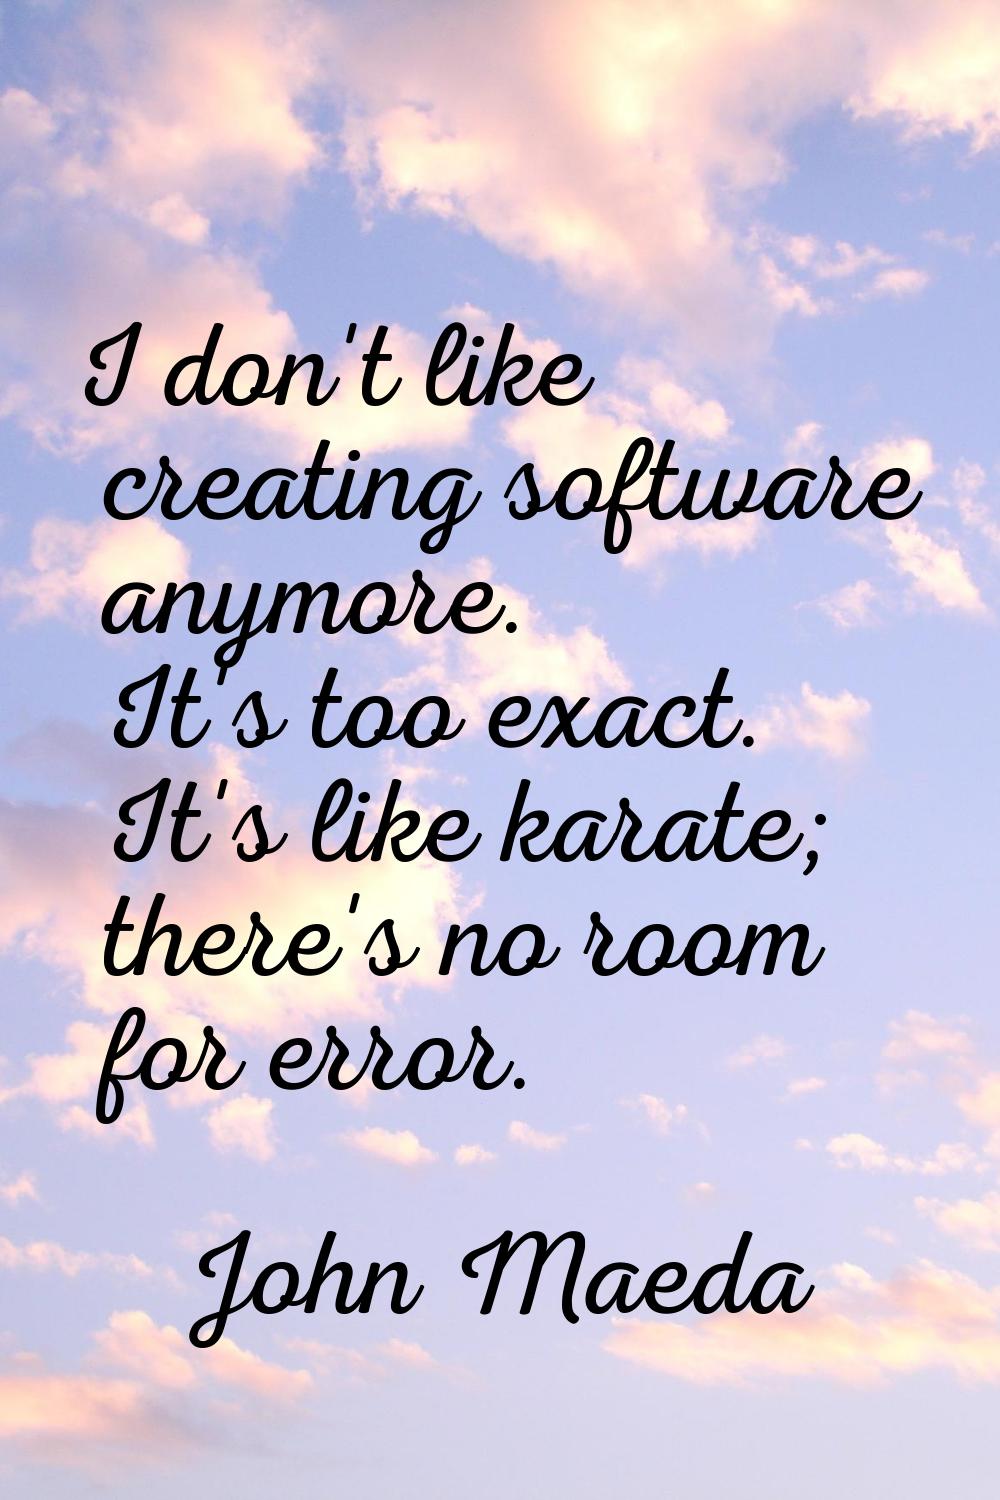 I don't like creating software anymore. It's too exact. It's like karate; there's no room for error